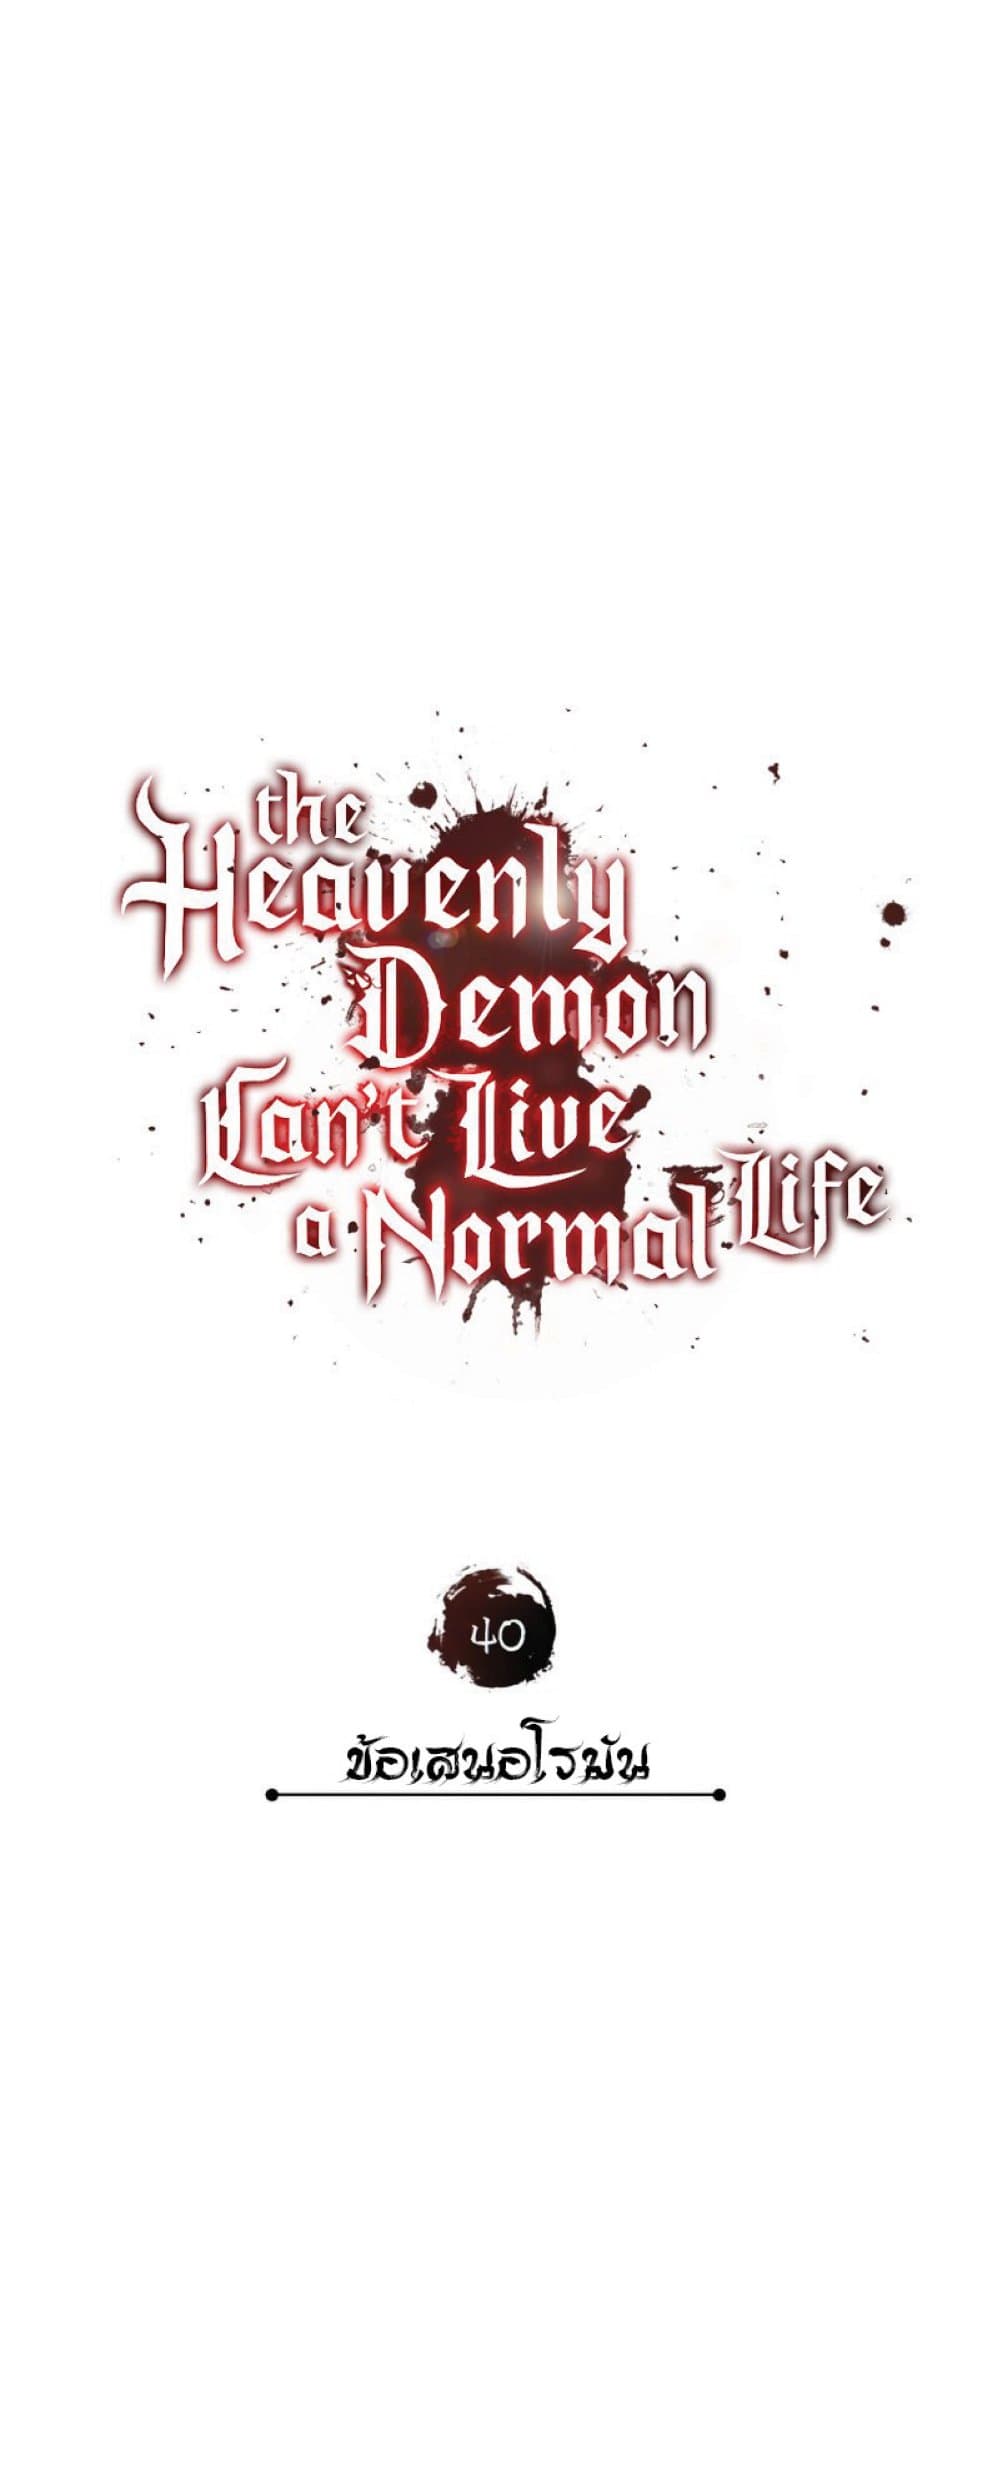 The Heavenly Demon Can’t Live a Normal Life 40 (23)